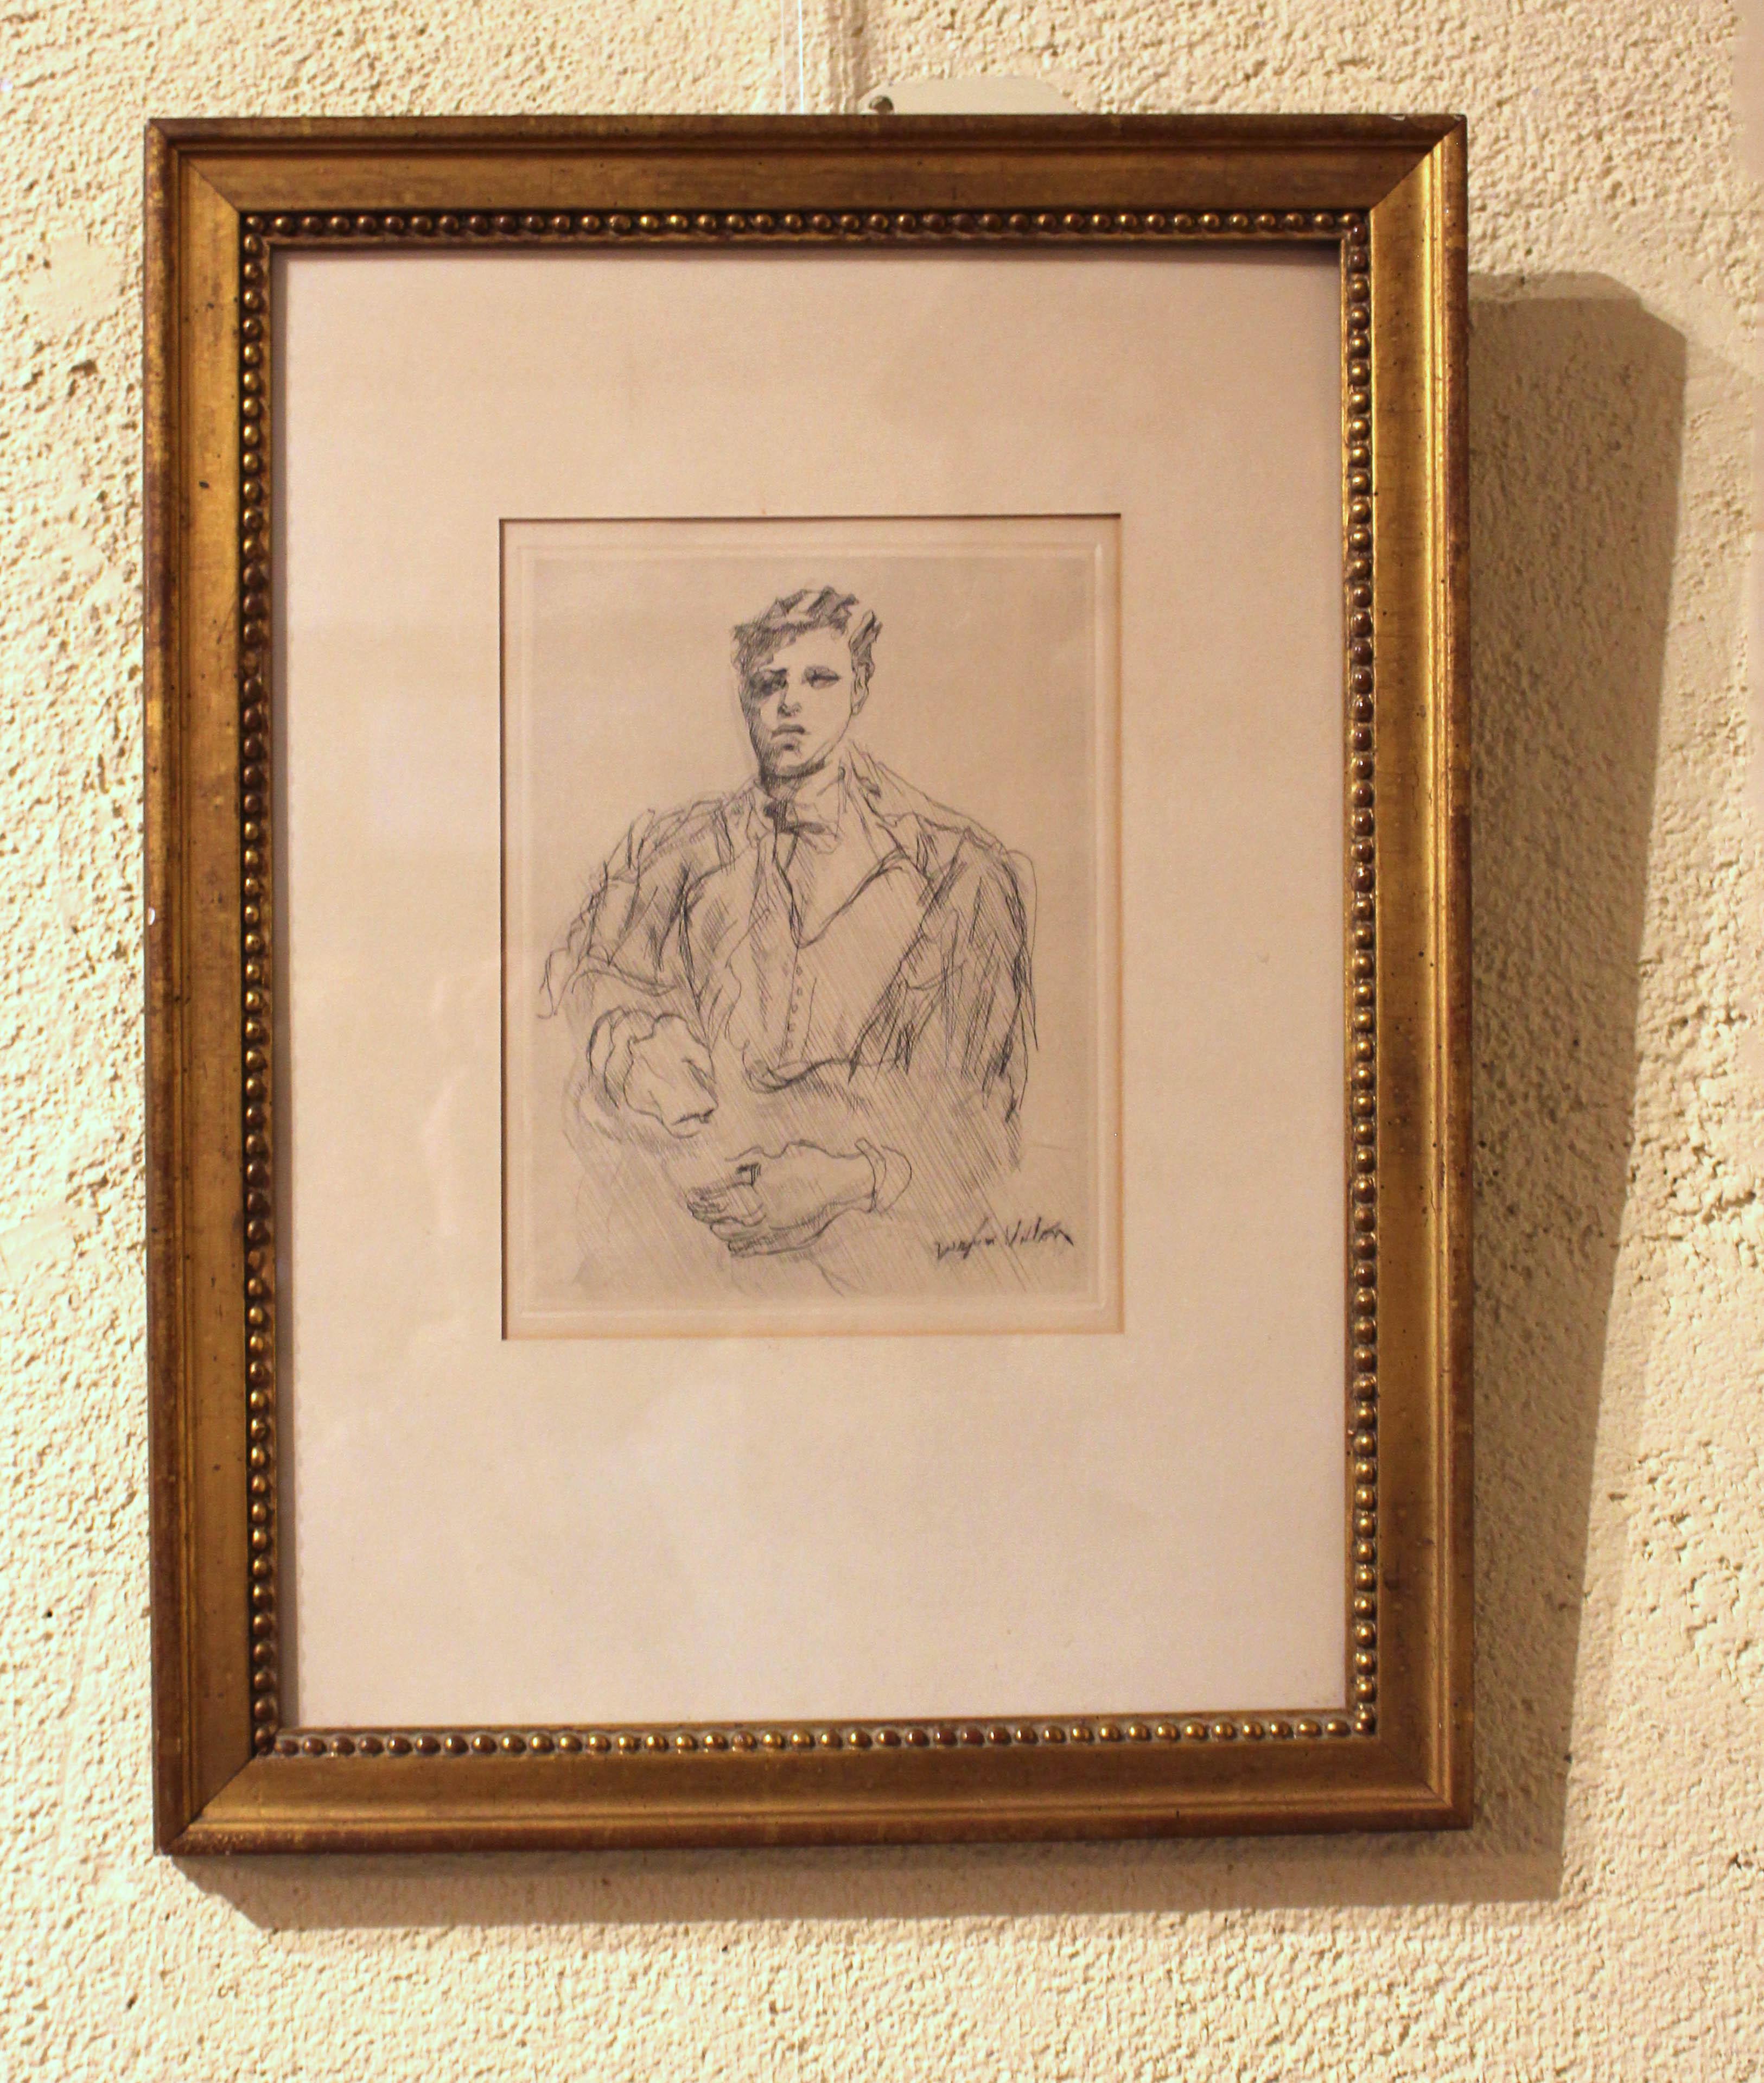 Etching portrait of Arthur Rimbaud, 1961, by Jacques Villon (French, 1875-1963). Villon was born Gaston Emil Duchamp (brother of famed Marcel, Suzanne & Raymond Duchamp). Rimbaud was a French poet (1854-1891).
Plate: 9 5/16